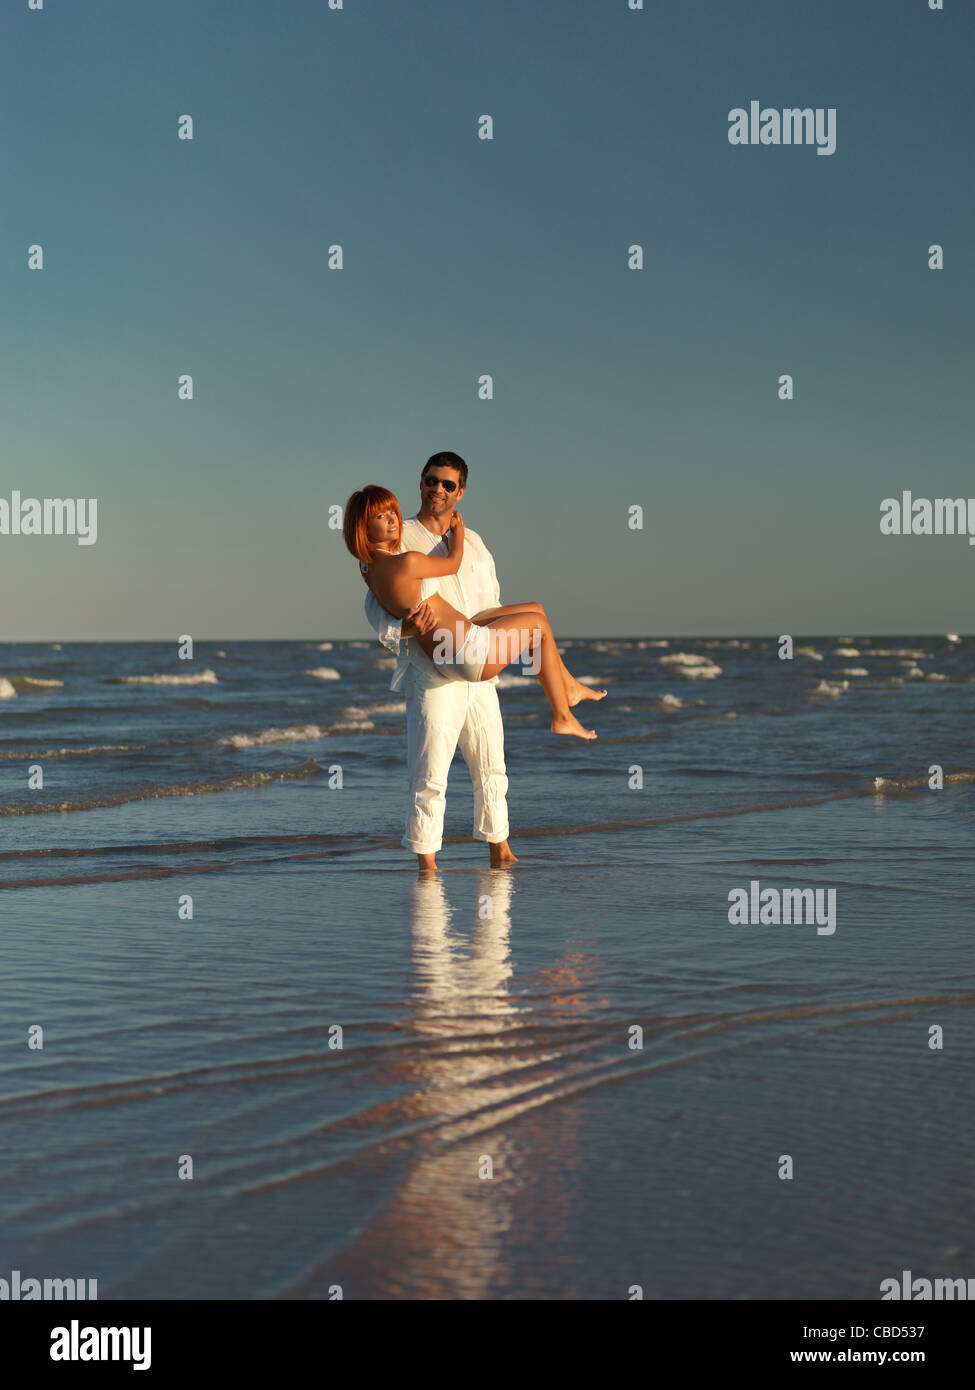 happy, young couple playing by the sea shore Stock Photo